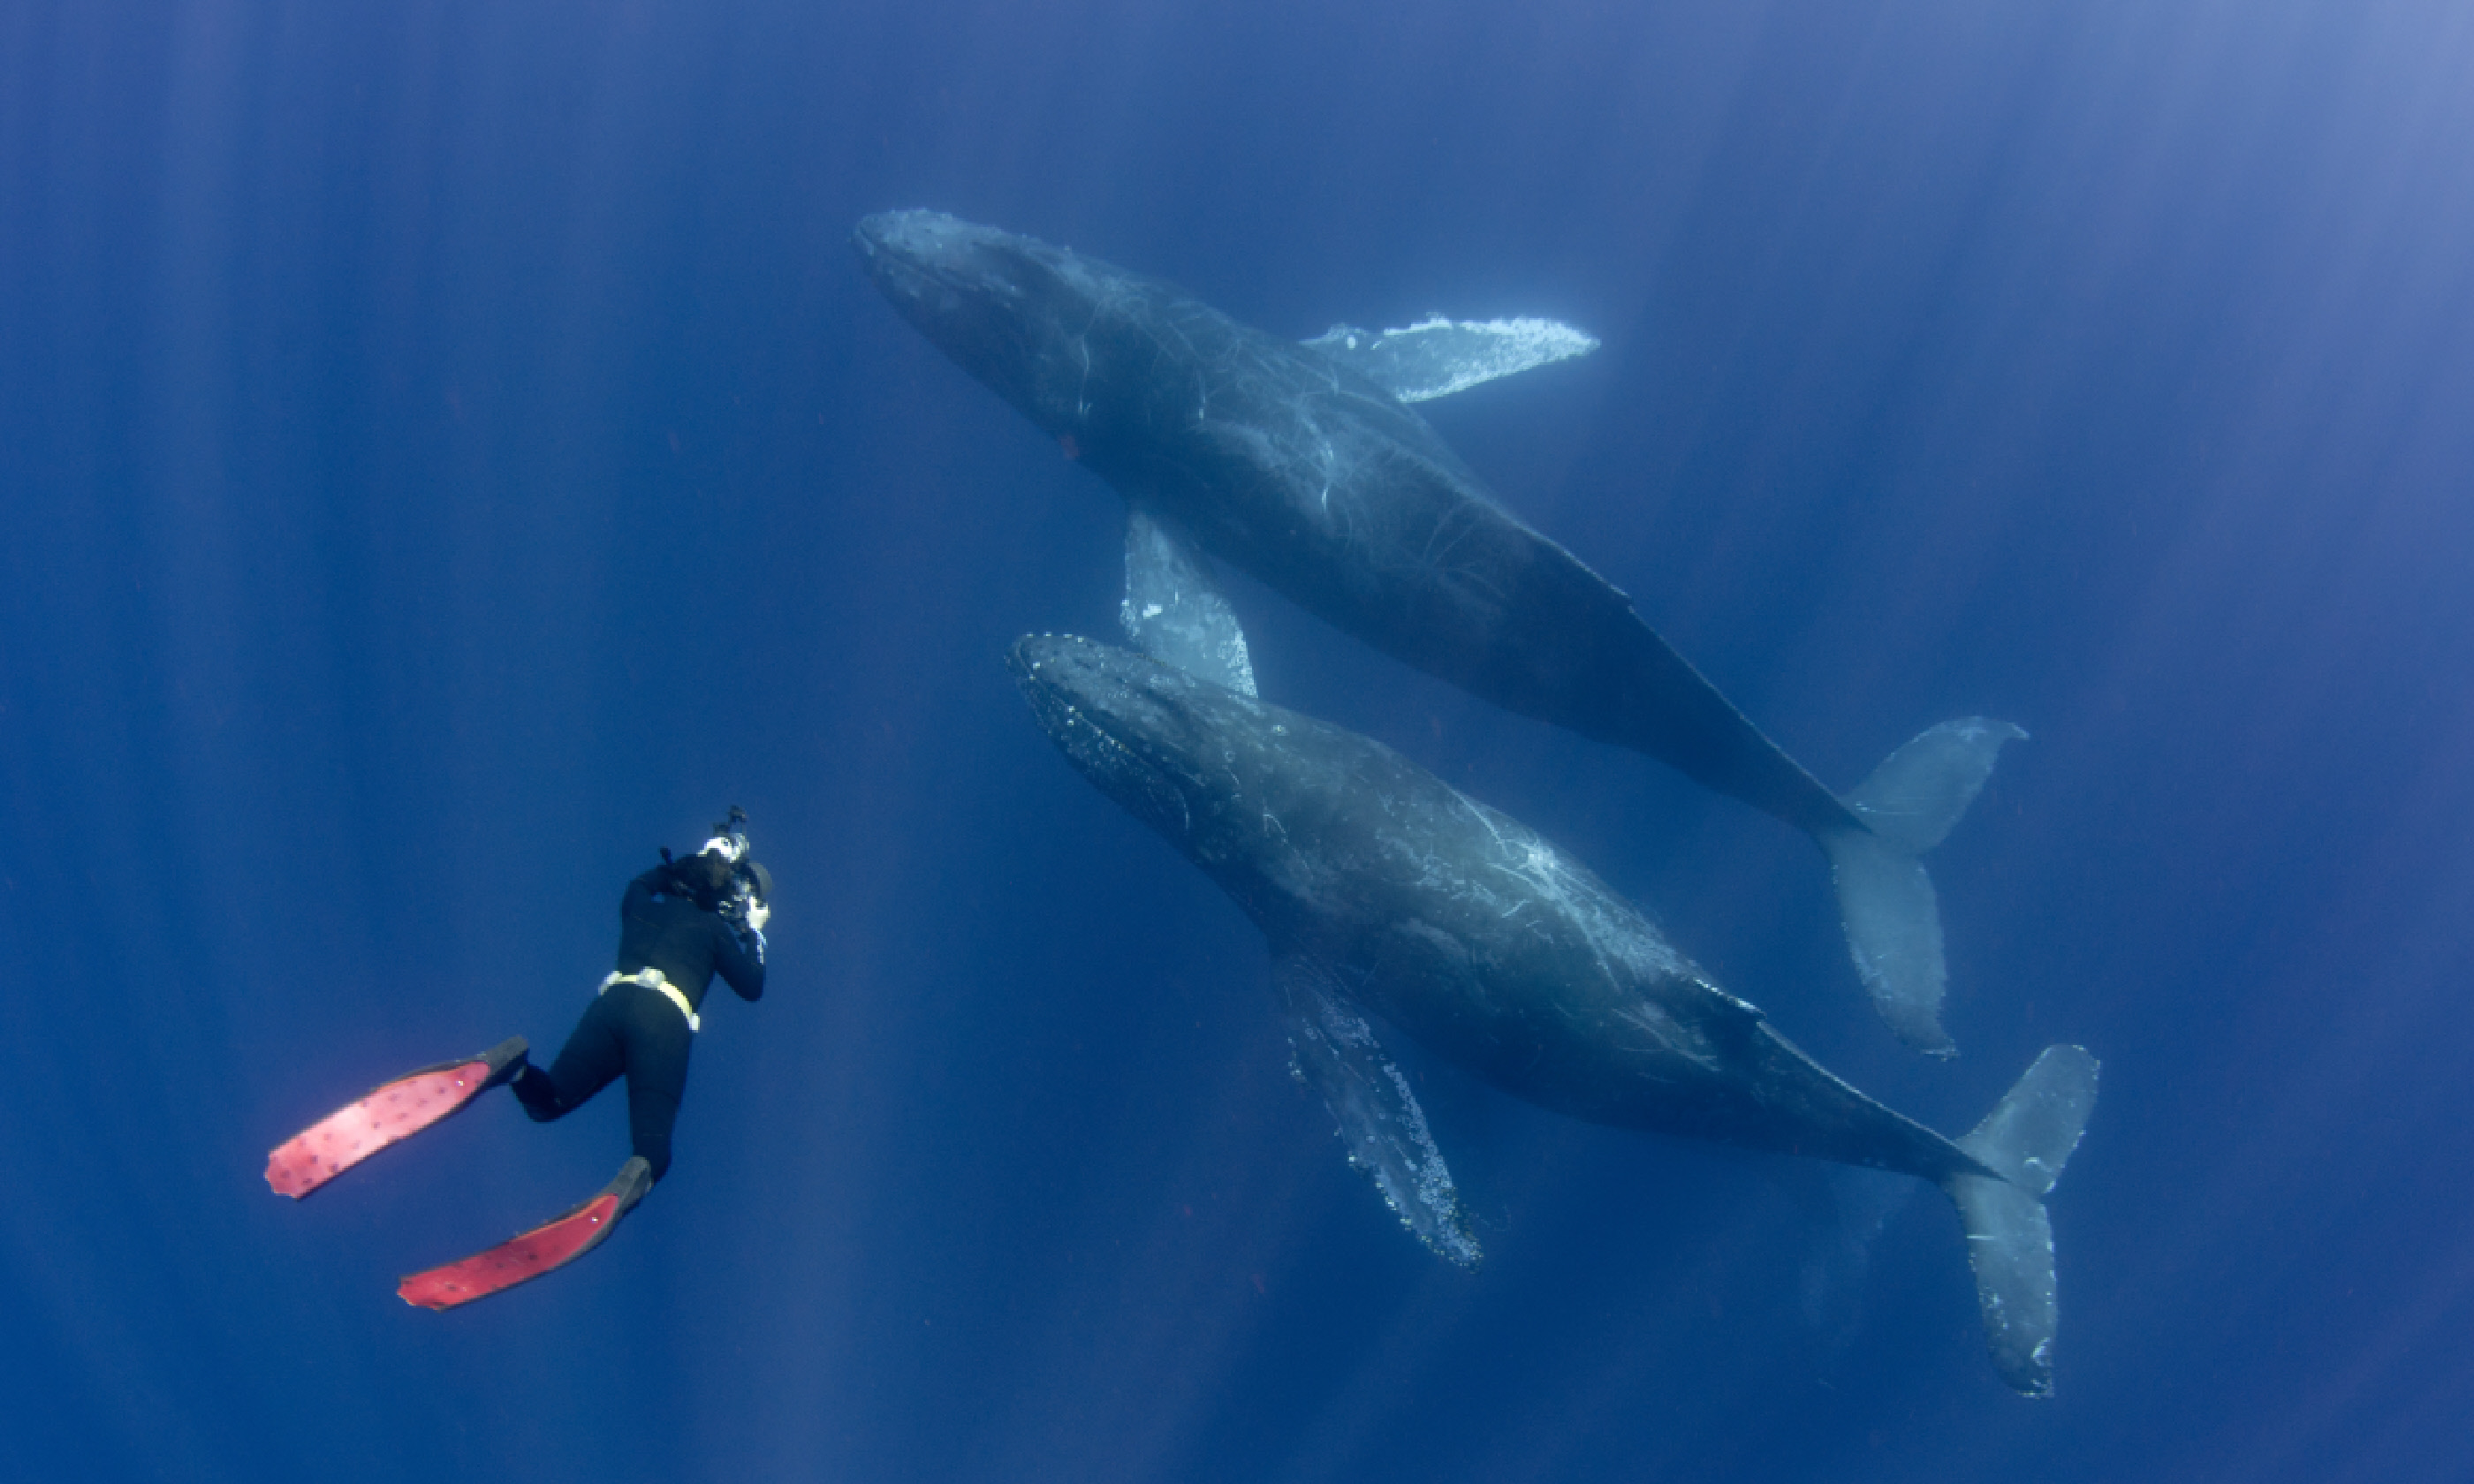 Free diver with humpback whales off Mexico's Baja peninsula (Shutterstock)